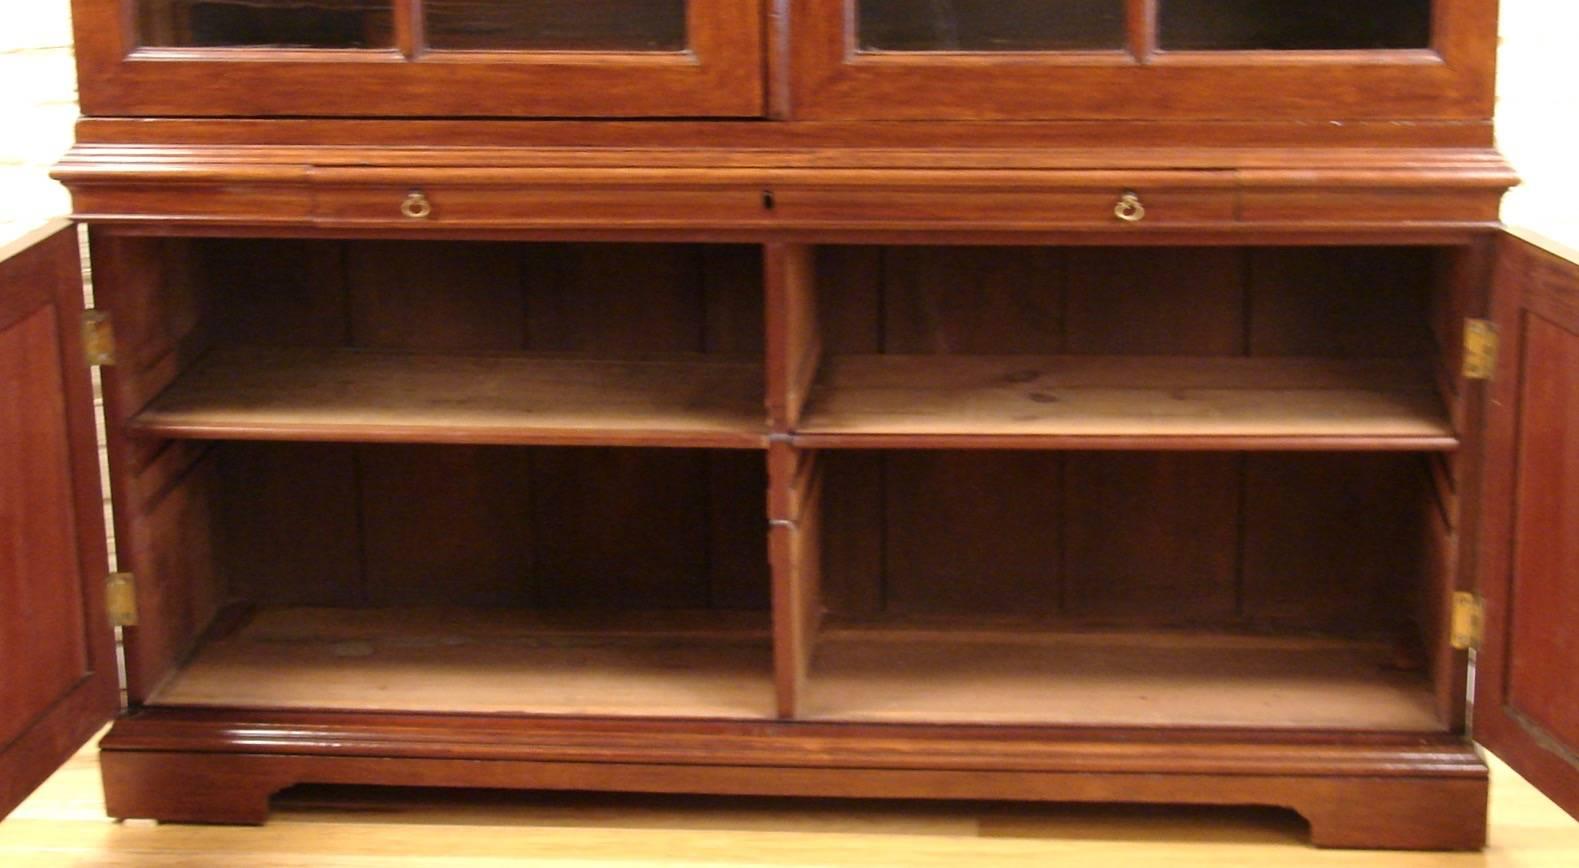 A handsome and substantial scale English George III mahogany bookcase cabinet, the upper stage with two large six-panel glazed cabinet doors, each concealing two adjustable shelves, above a single long drawer over two cabinet doors with interior